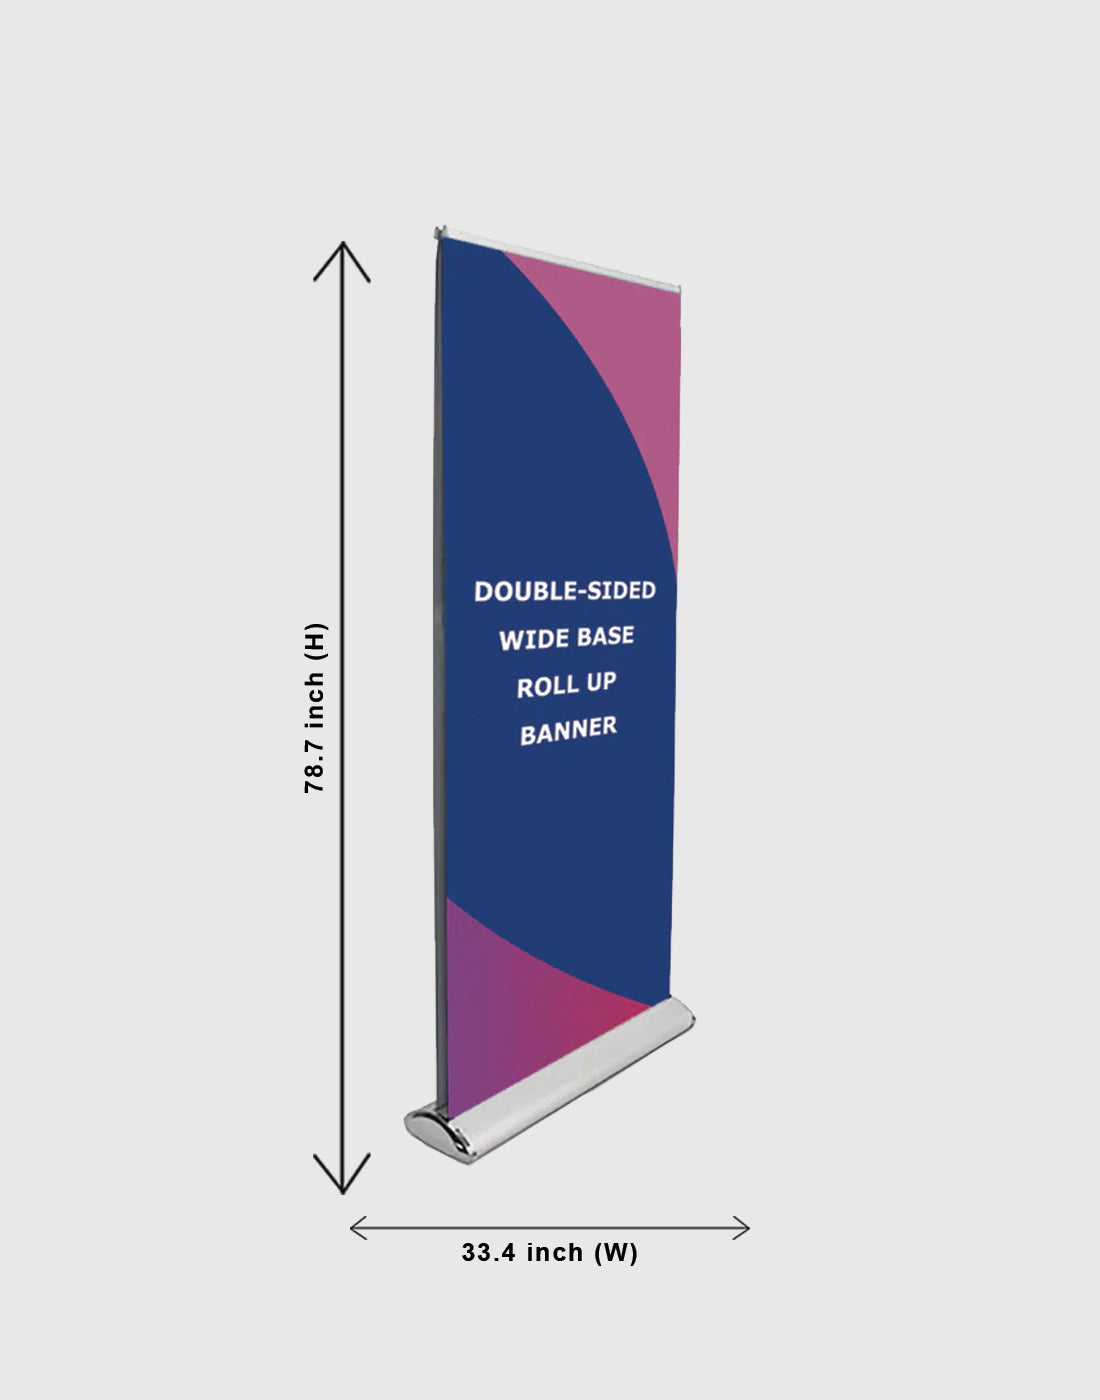 Double-screen wide base Roll Up Banner